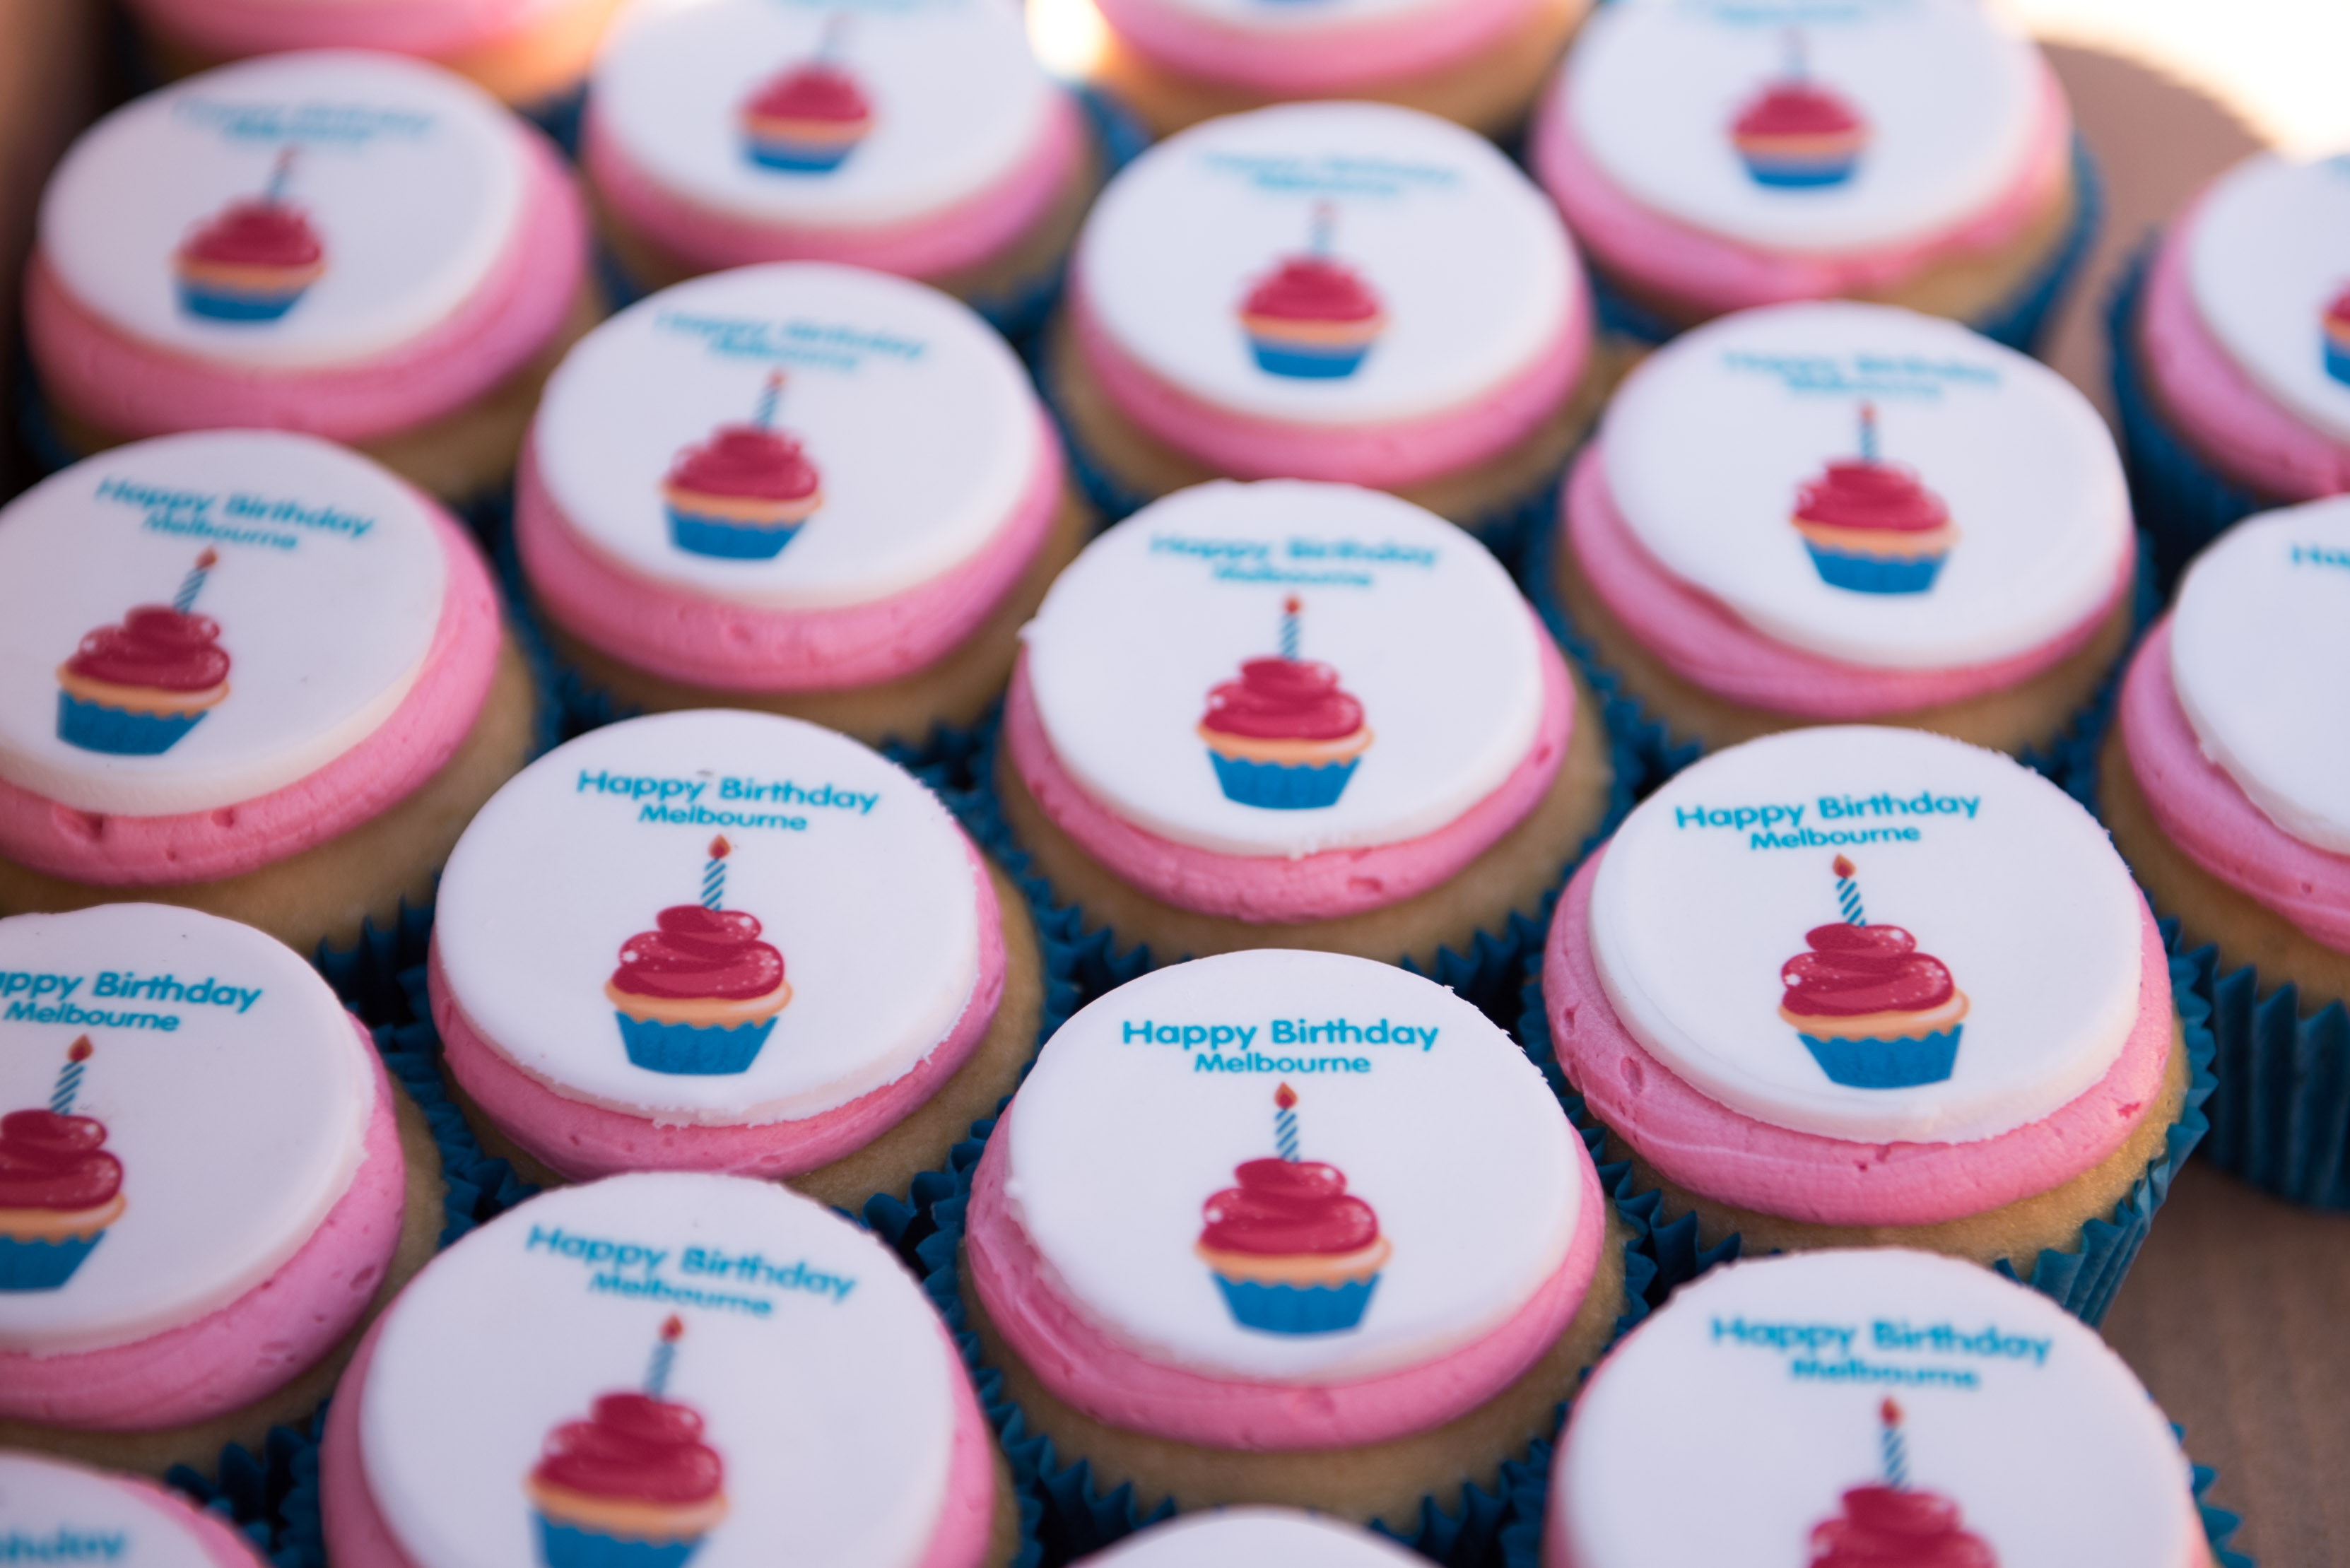 Melbourne Day cup cakes